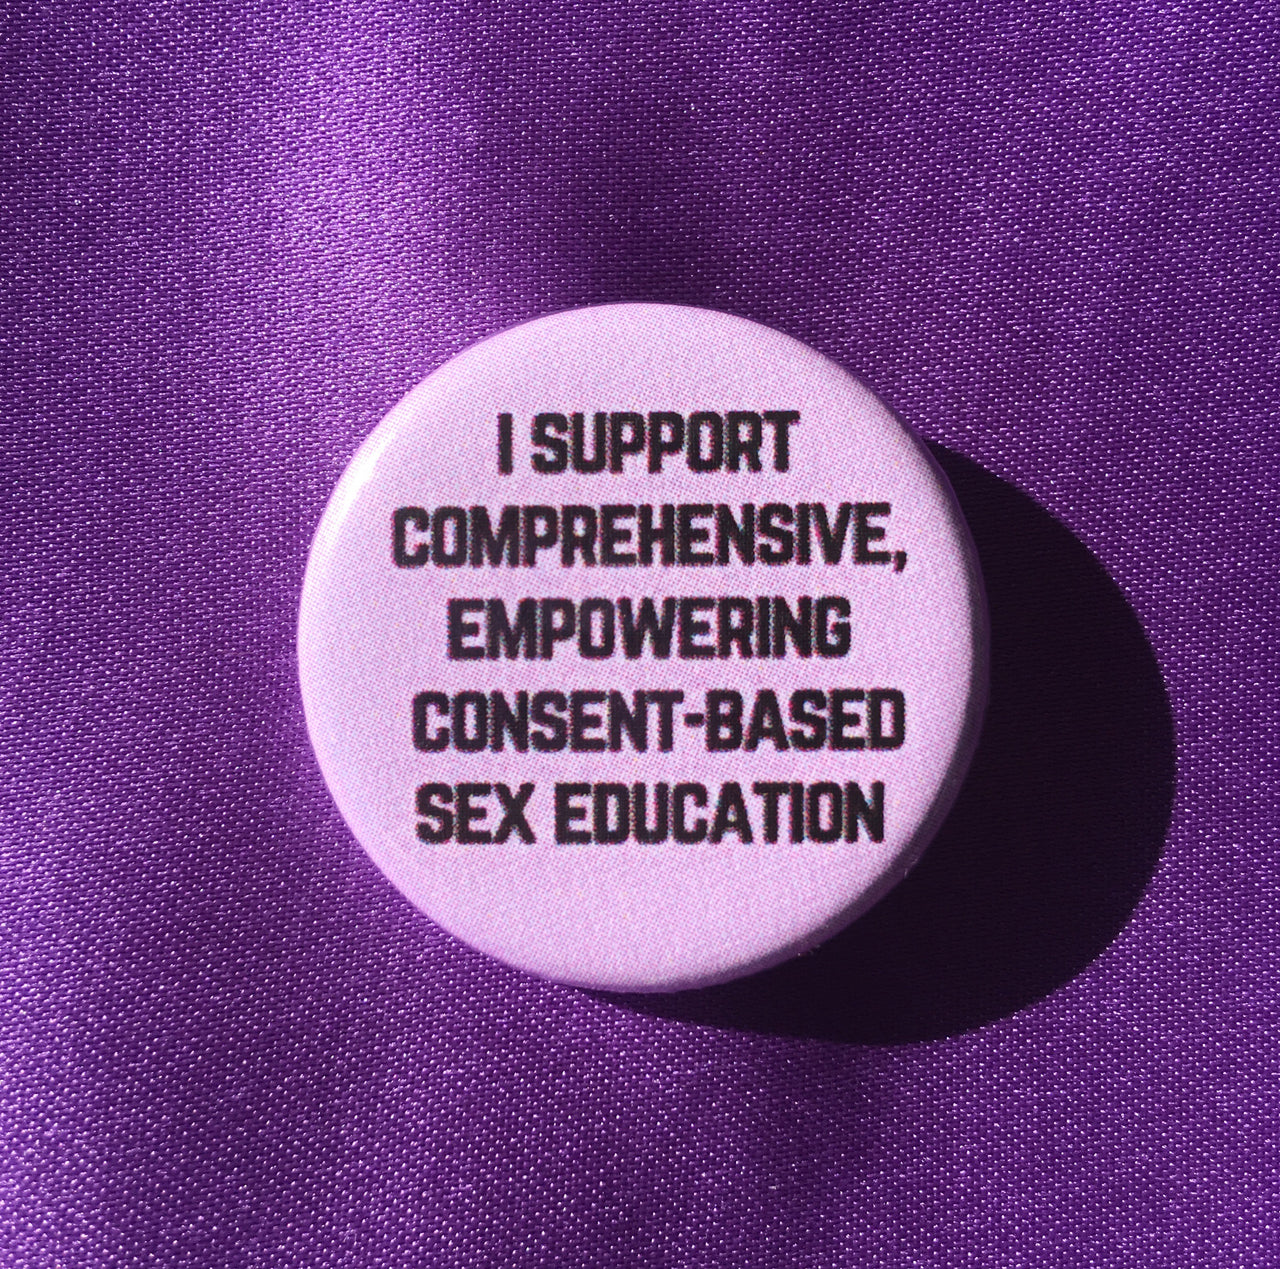 I support comprehensive, empowering consent-based sex education - Radical Buttons